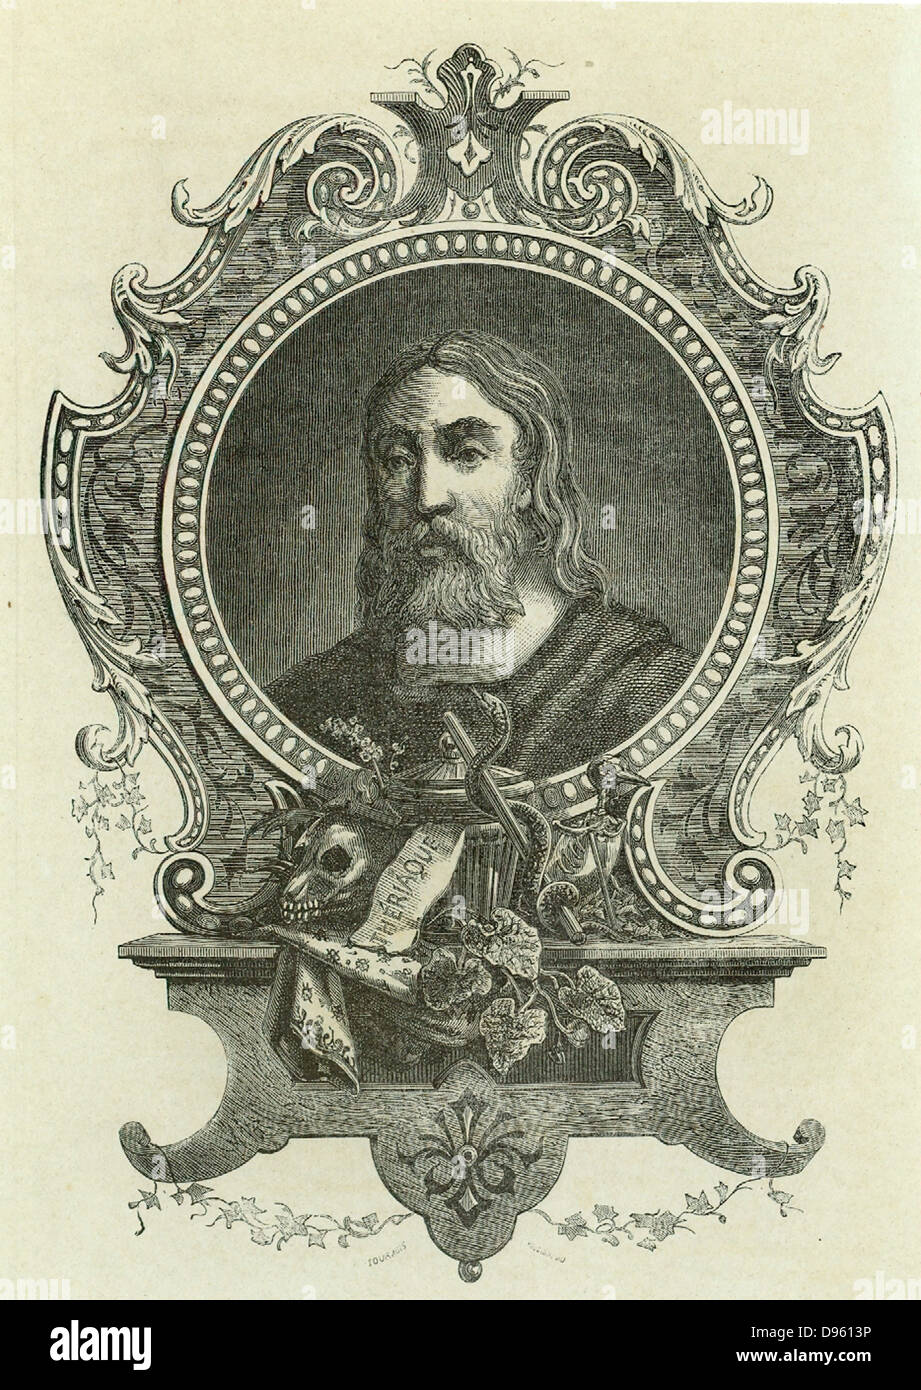 Galen (Claudius Galenus c130-201 AD) Greek physician who moved to Rome and became physician to three emperors.  Engraving published Paris, 1866. Stock Photo